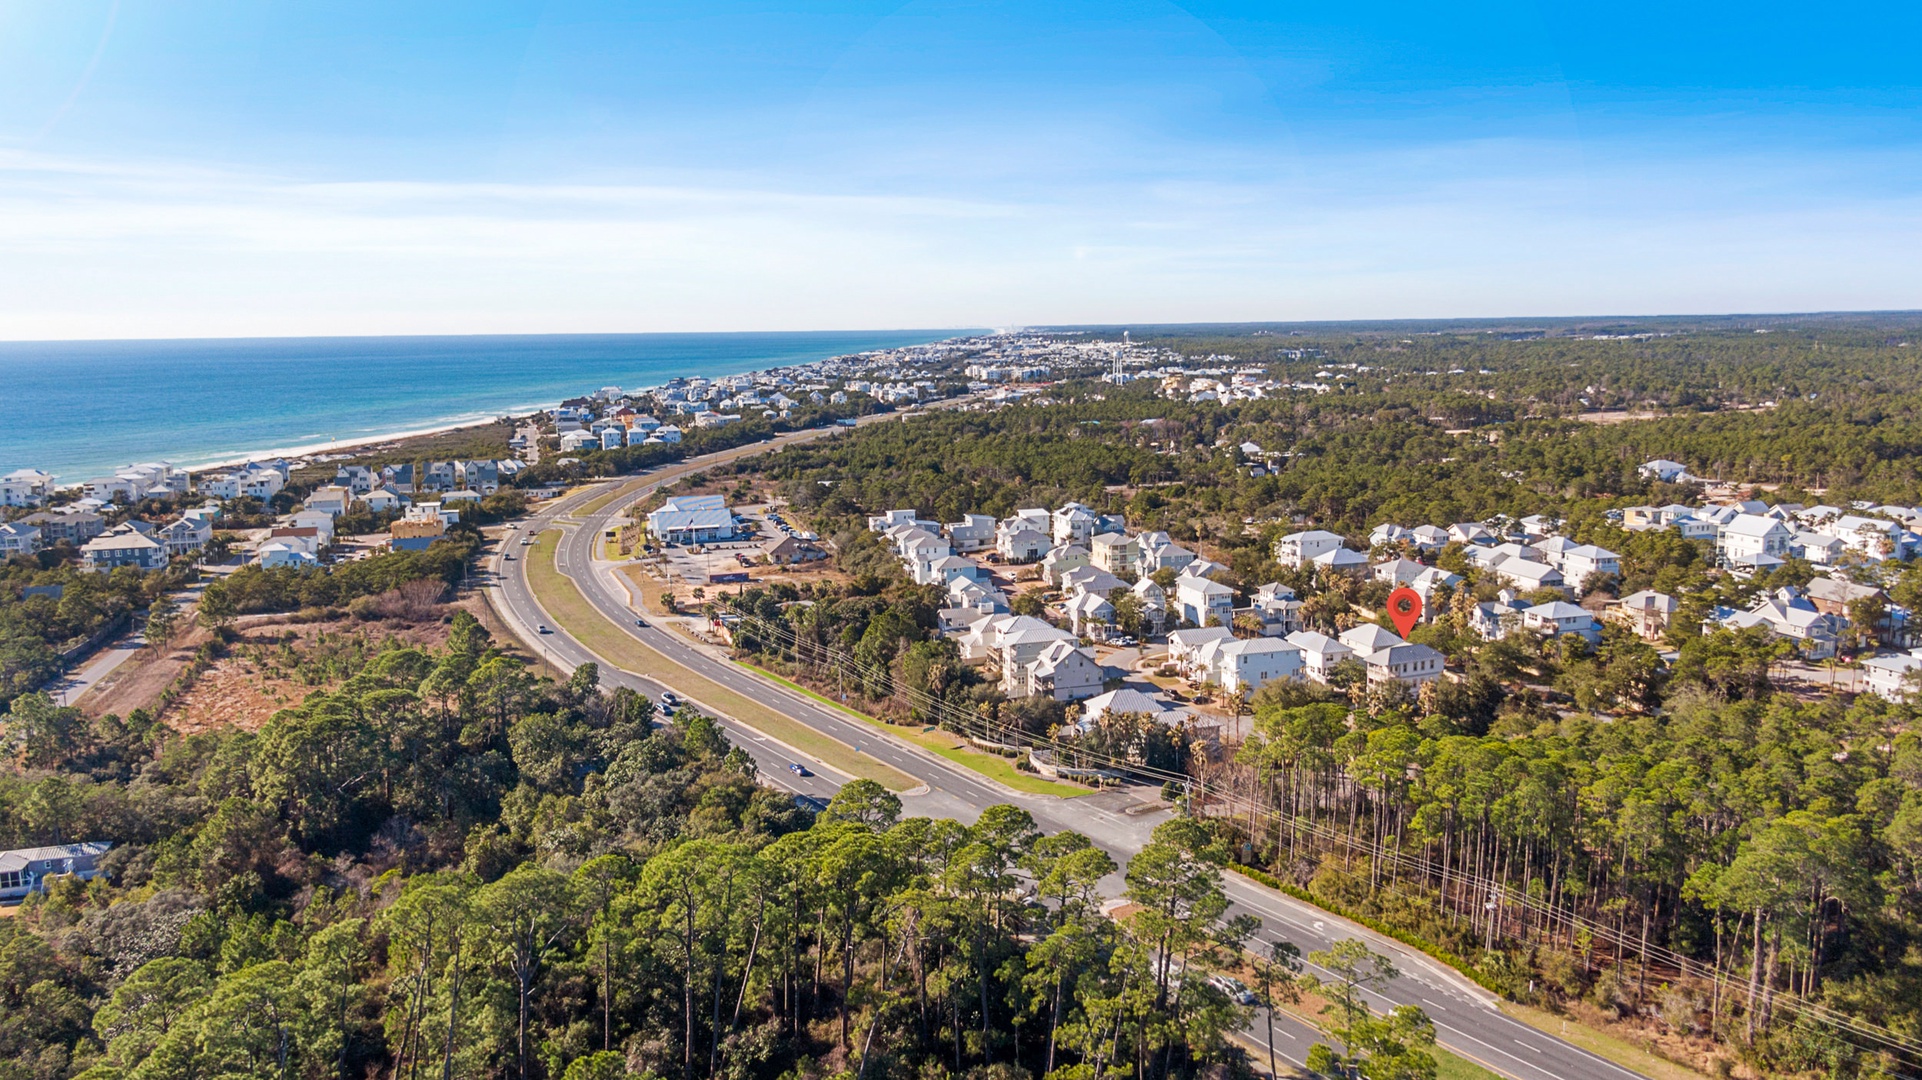 The Narnia aerial view - close to Inlet and Rosemary Beaches!